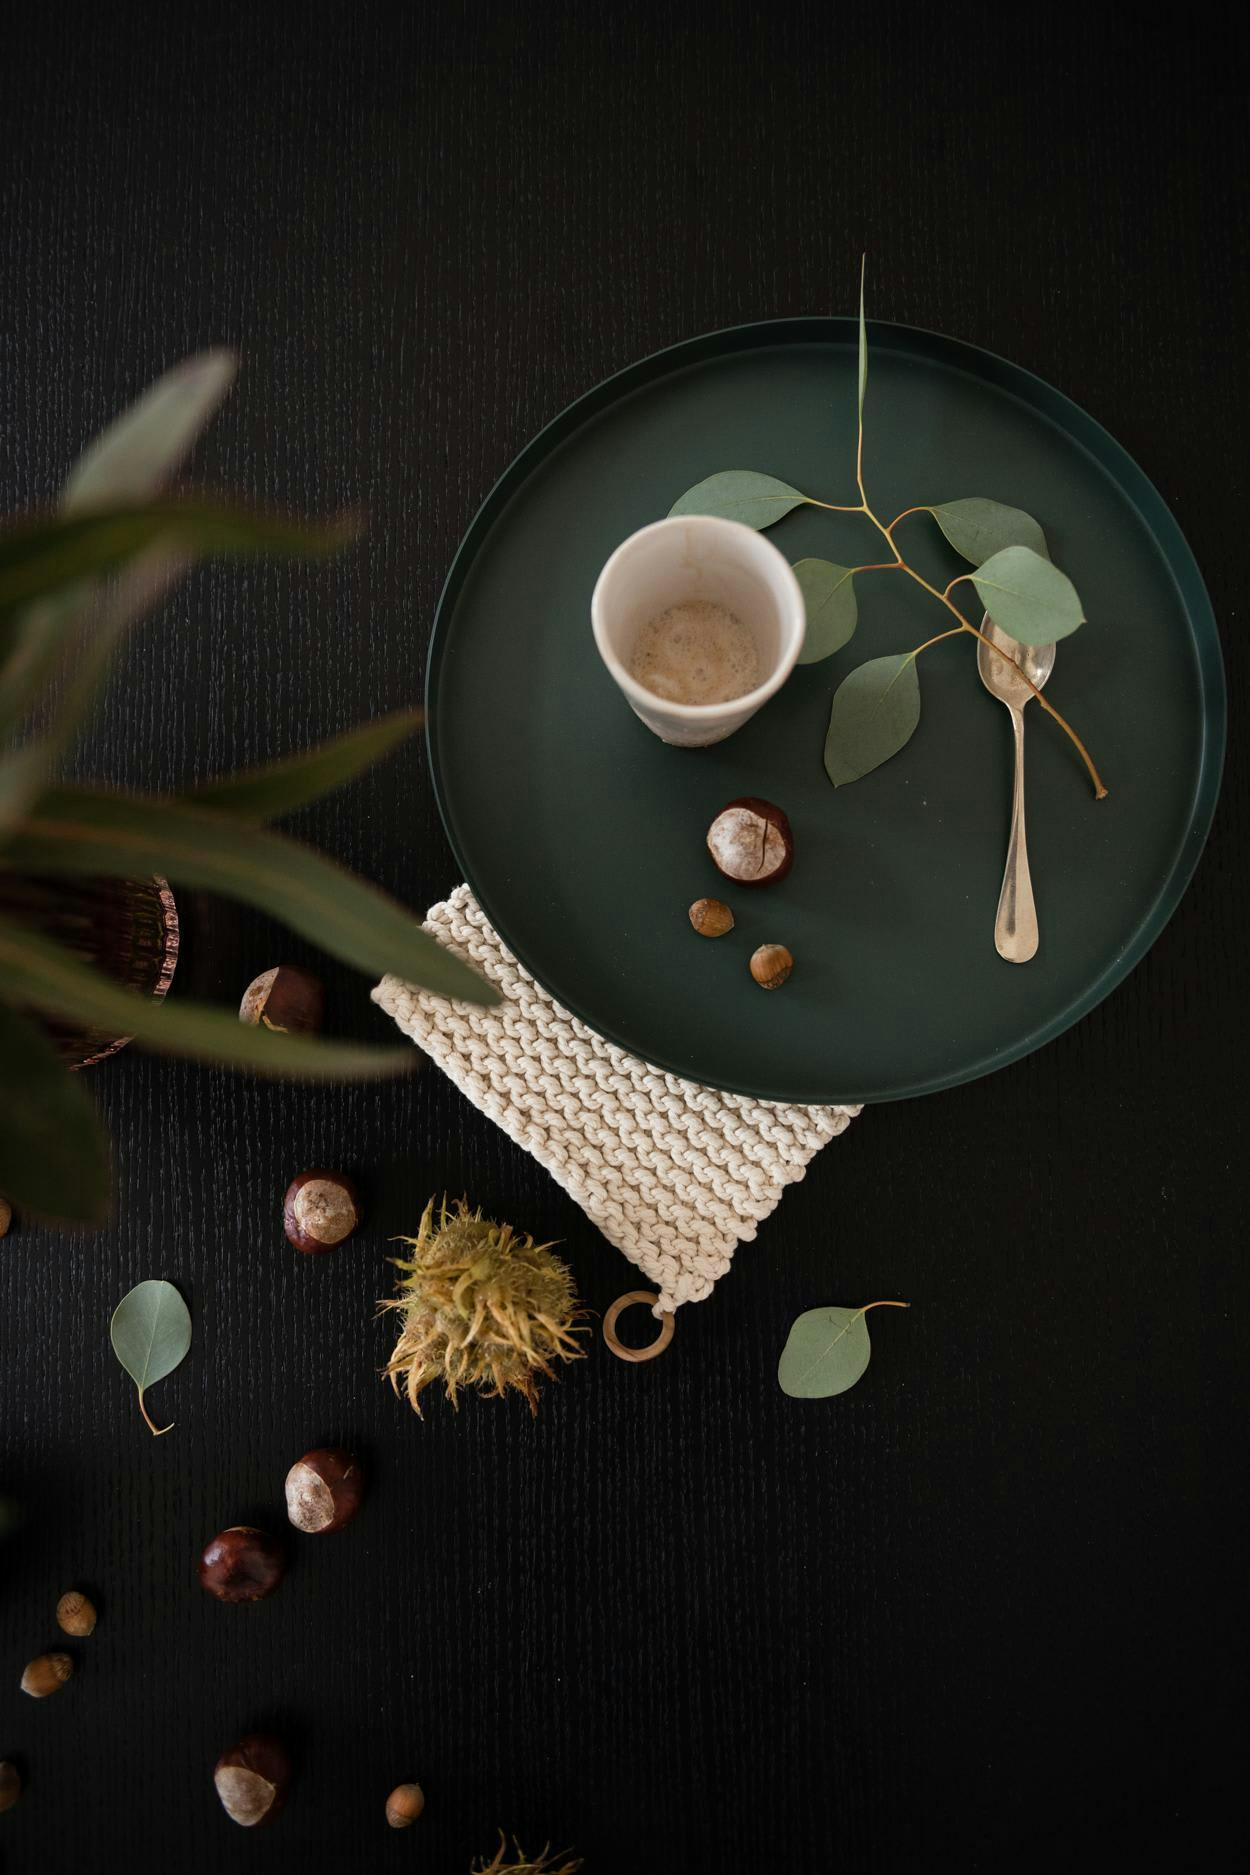 The image features a green plate with a cup of coffee and a spoon on it. The plate is placed on a table, and the coffee is poured into the cup. There are also some small pine cones scattered around the plate, adding a touch of nature to the scene.

In addition to the main plate, there are two smaller pine cones placed on the table, one near the left edge and the other near the right edge. These small pine cones add a decorative element to the scene, further enhancing the overall aesthetic.